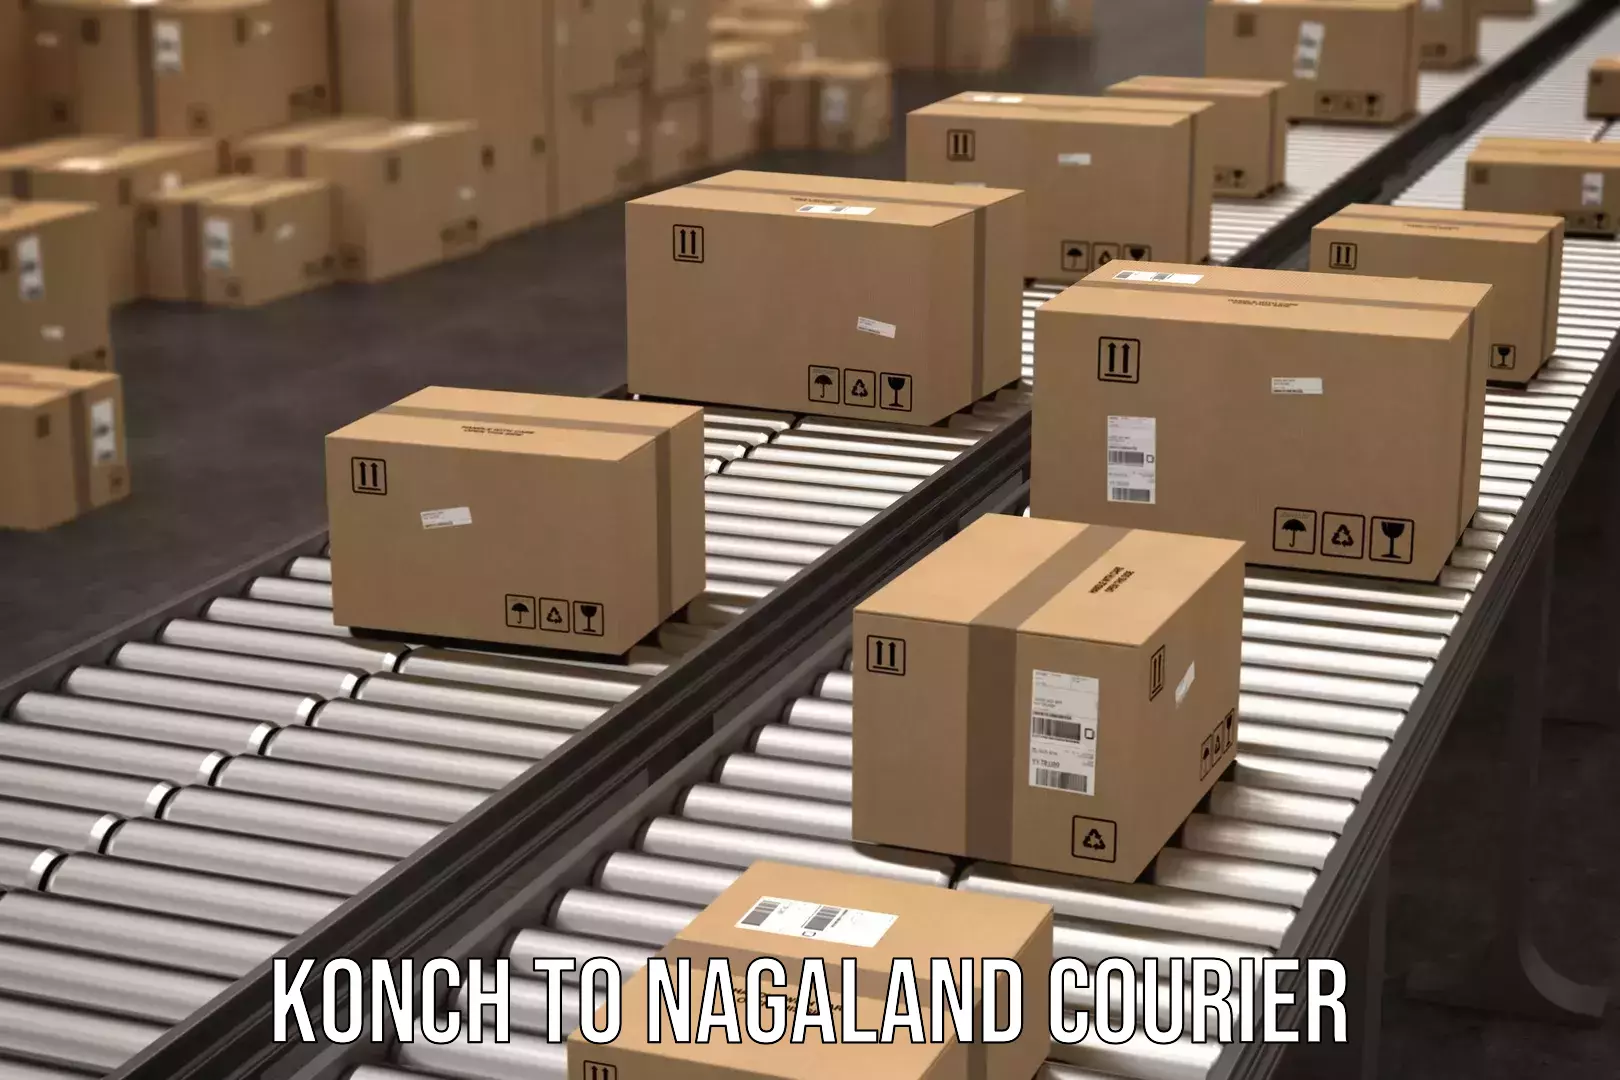 Express courier facilities Konch to Peren